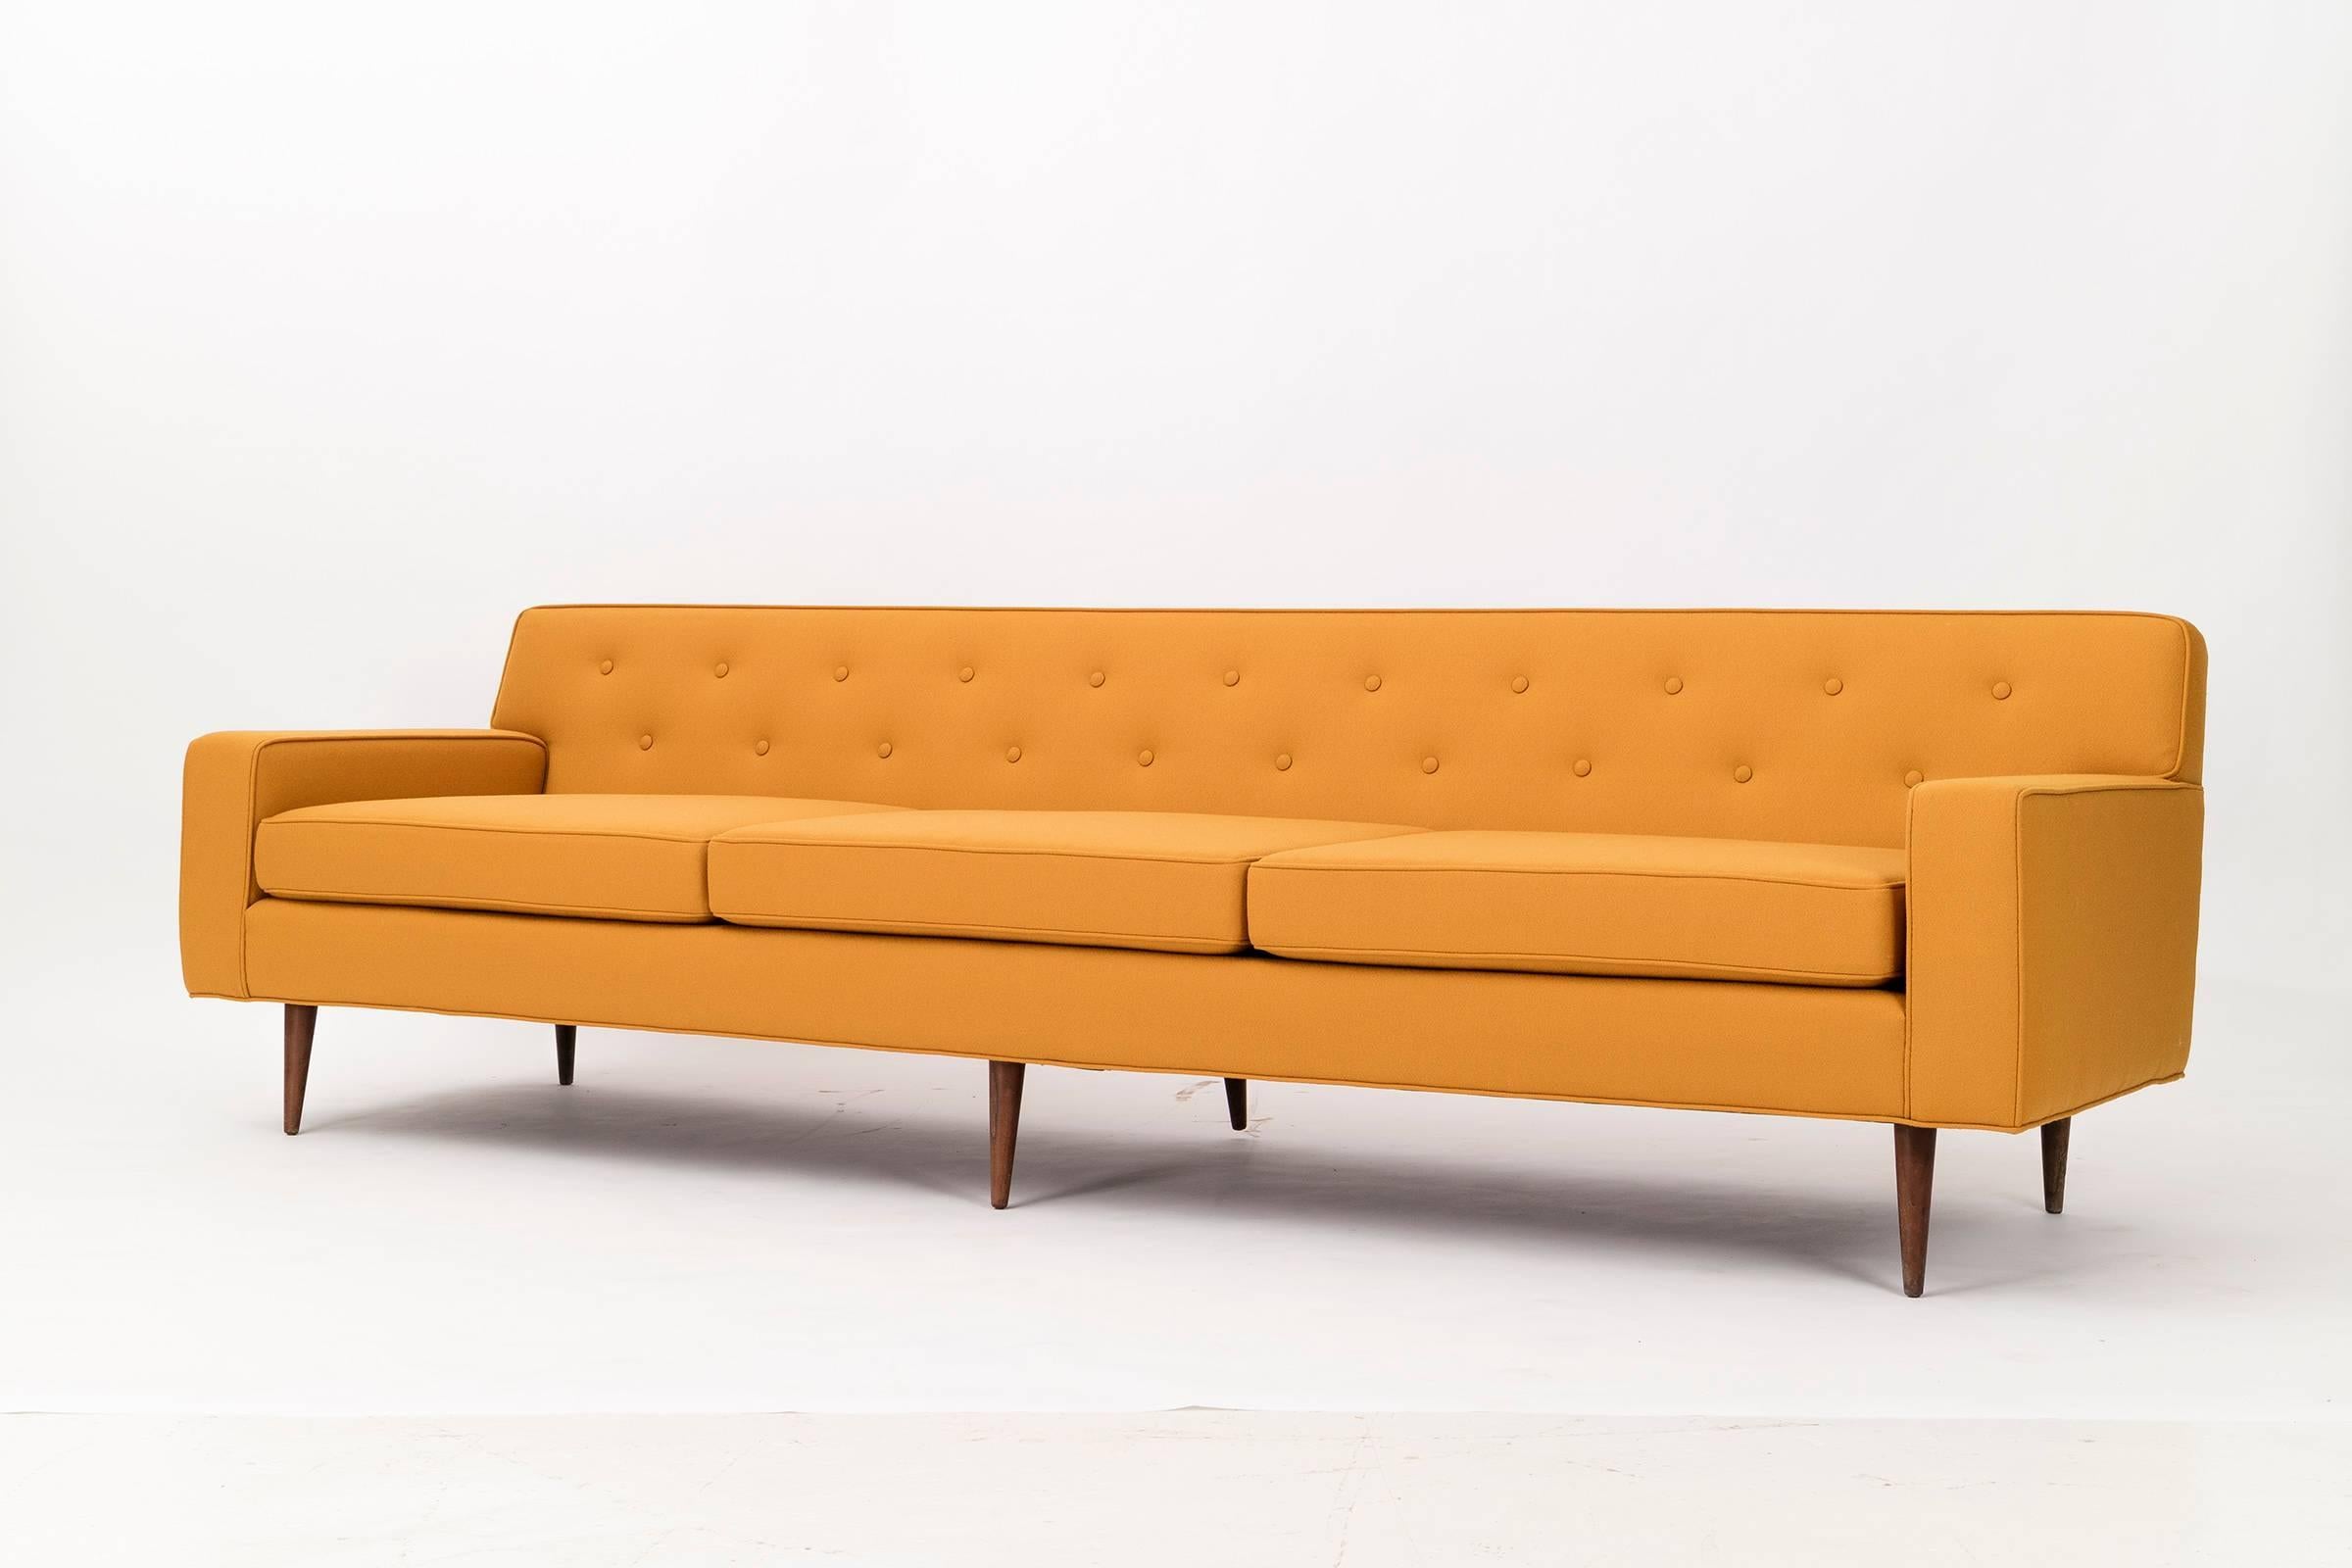 Baughman, three-seat sofa, tufted button backs with walnut legs.
Can be sold individually.
Reupholstered with Maharam Topas 100% wool, high quality durable crepe.